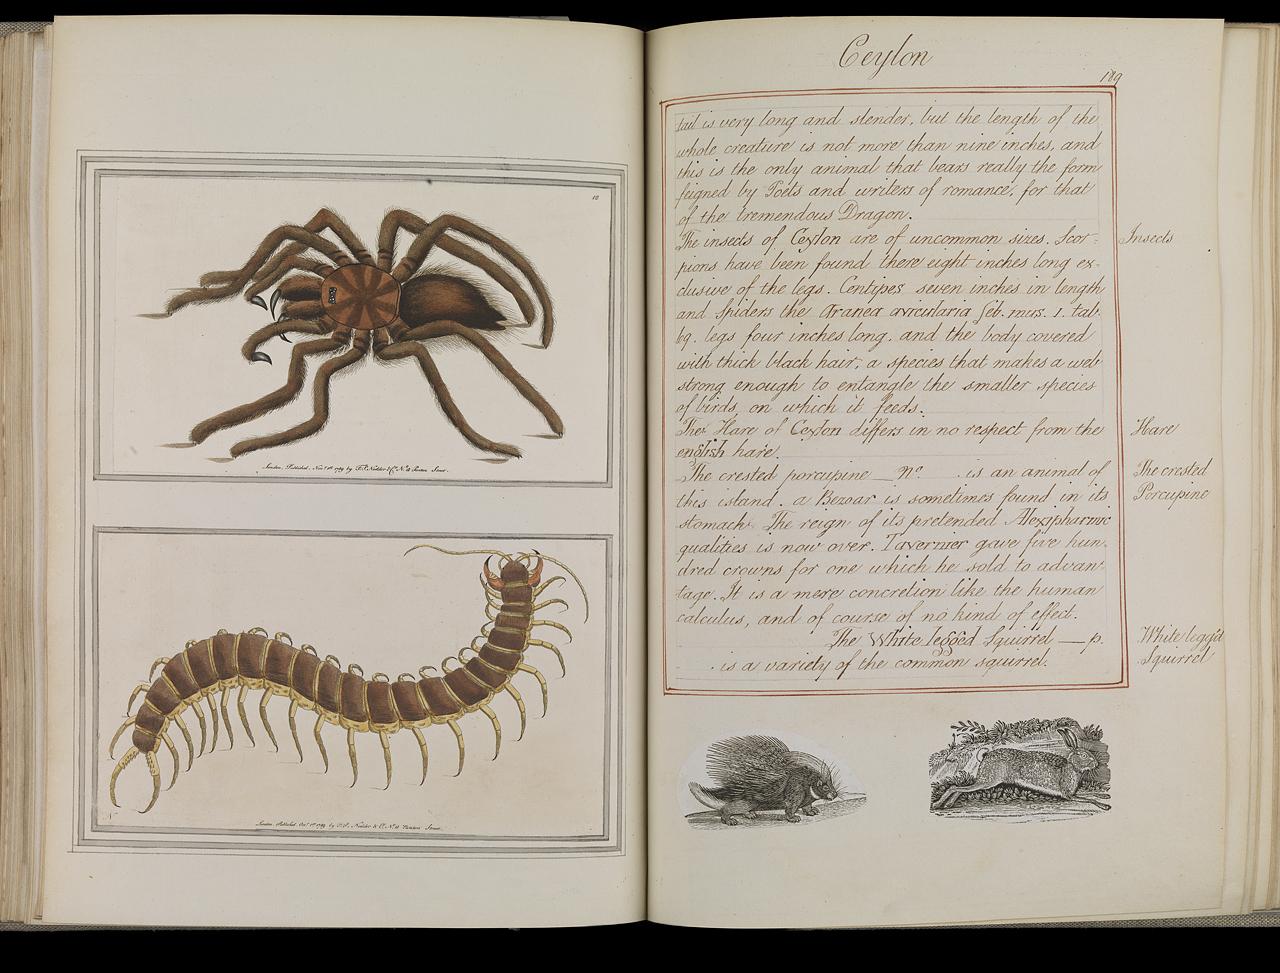 A image of a book containing engravings of a spider and a millipede, with text to the right 